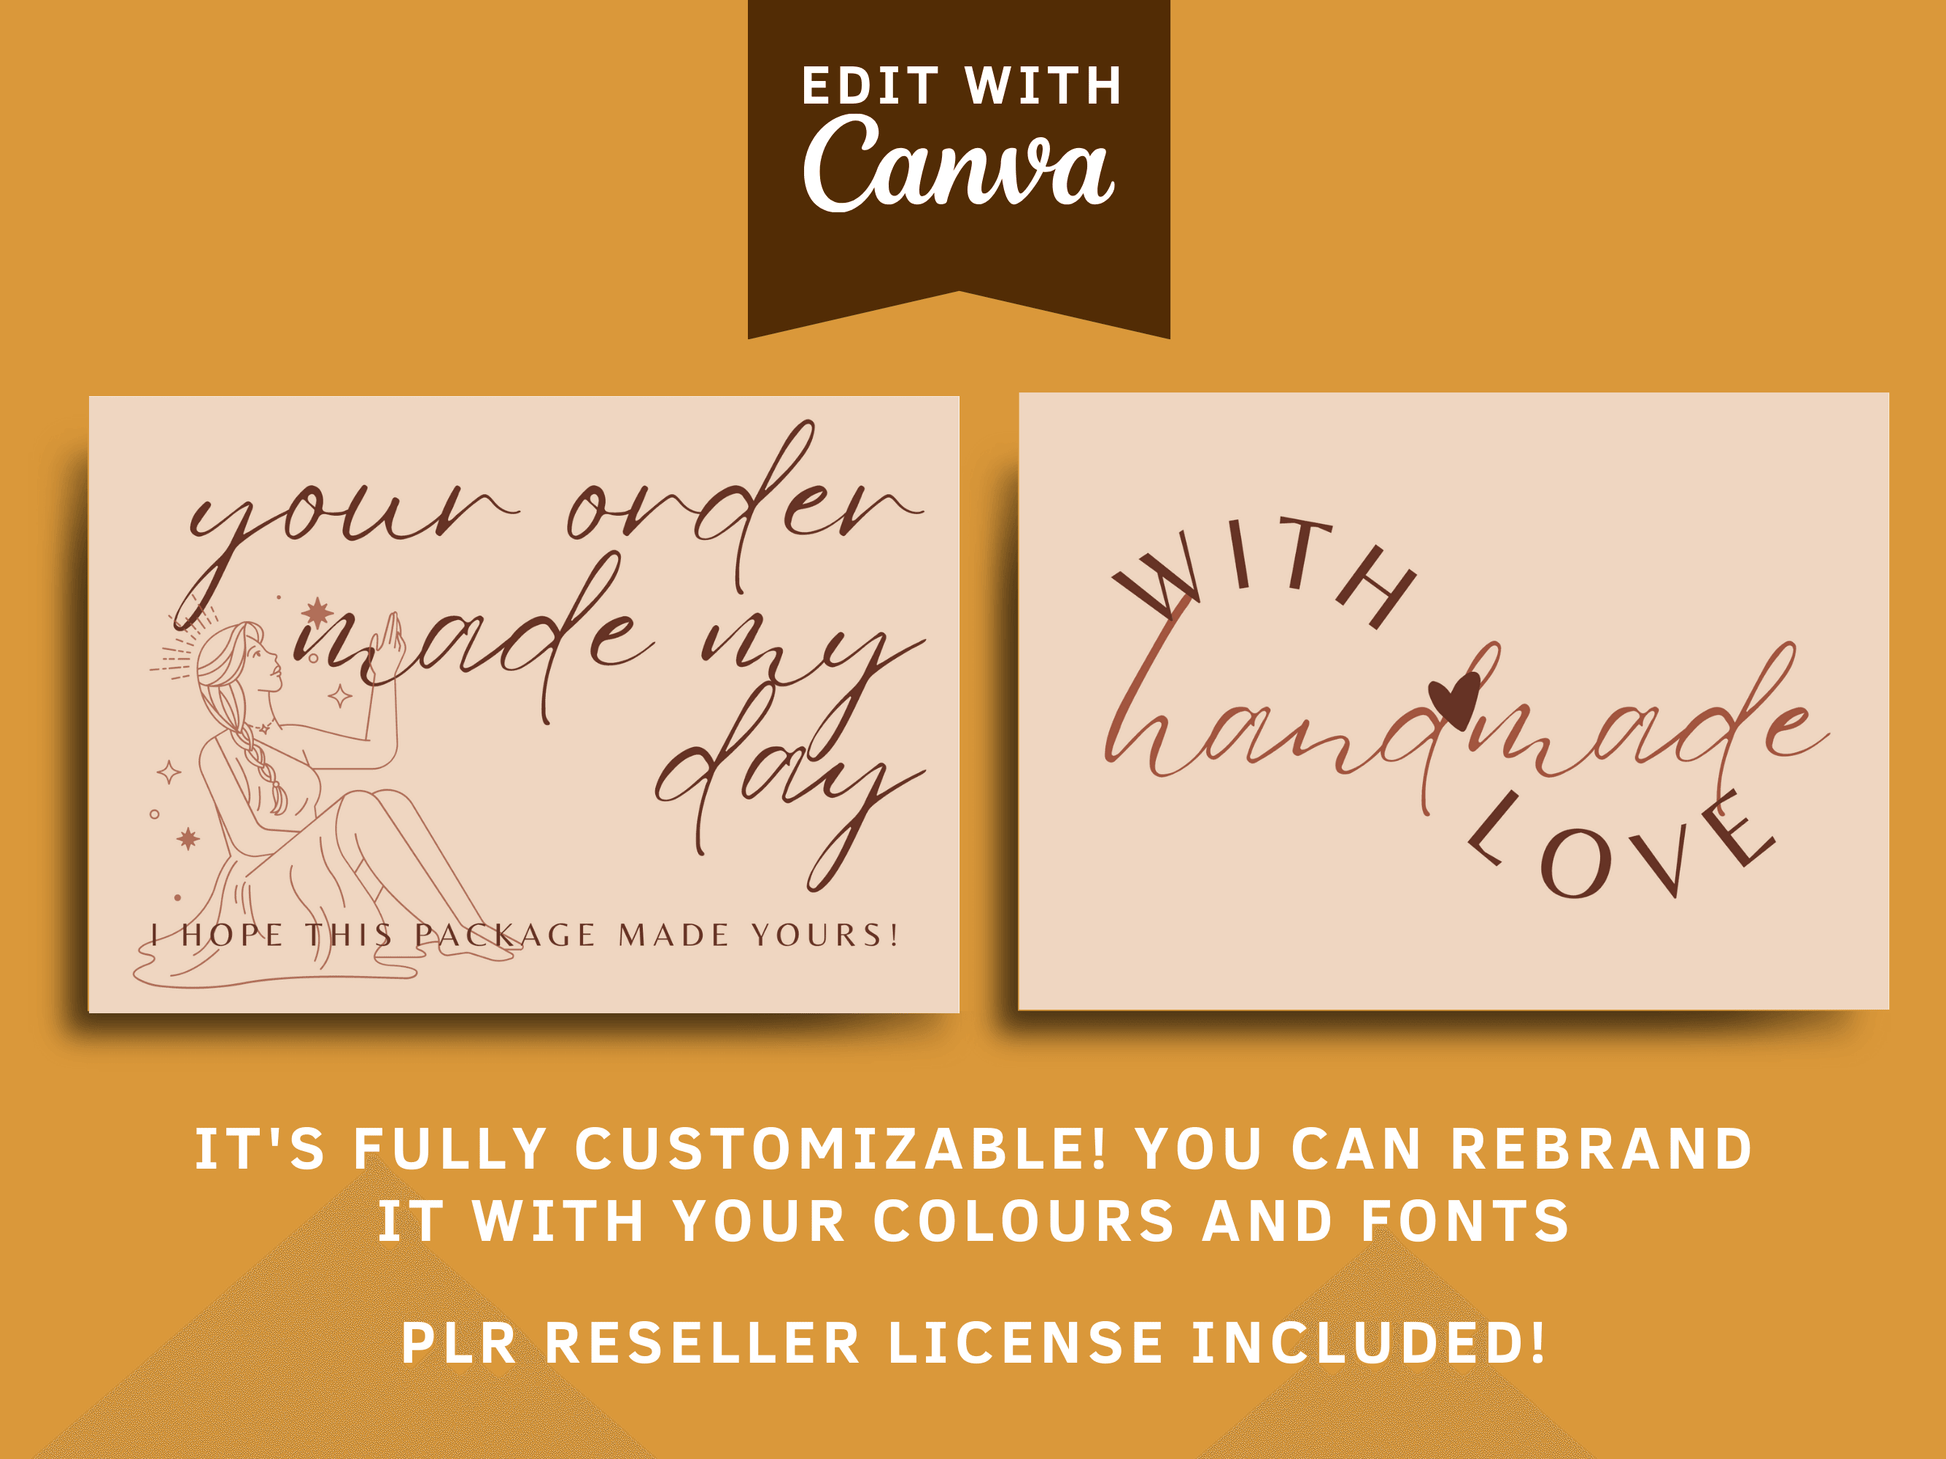 Your order made my day car templates with aesthetic font and boho colors and elements which say "your order made my day, I hope this package made yours!" and "with handmade love". It's fully customizable. You can rebrand it with your colors and fonts. PLR reseller license included!